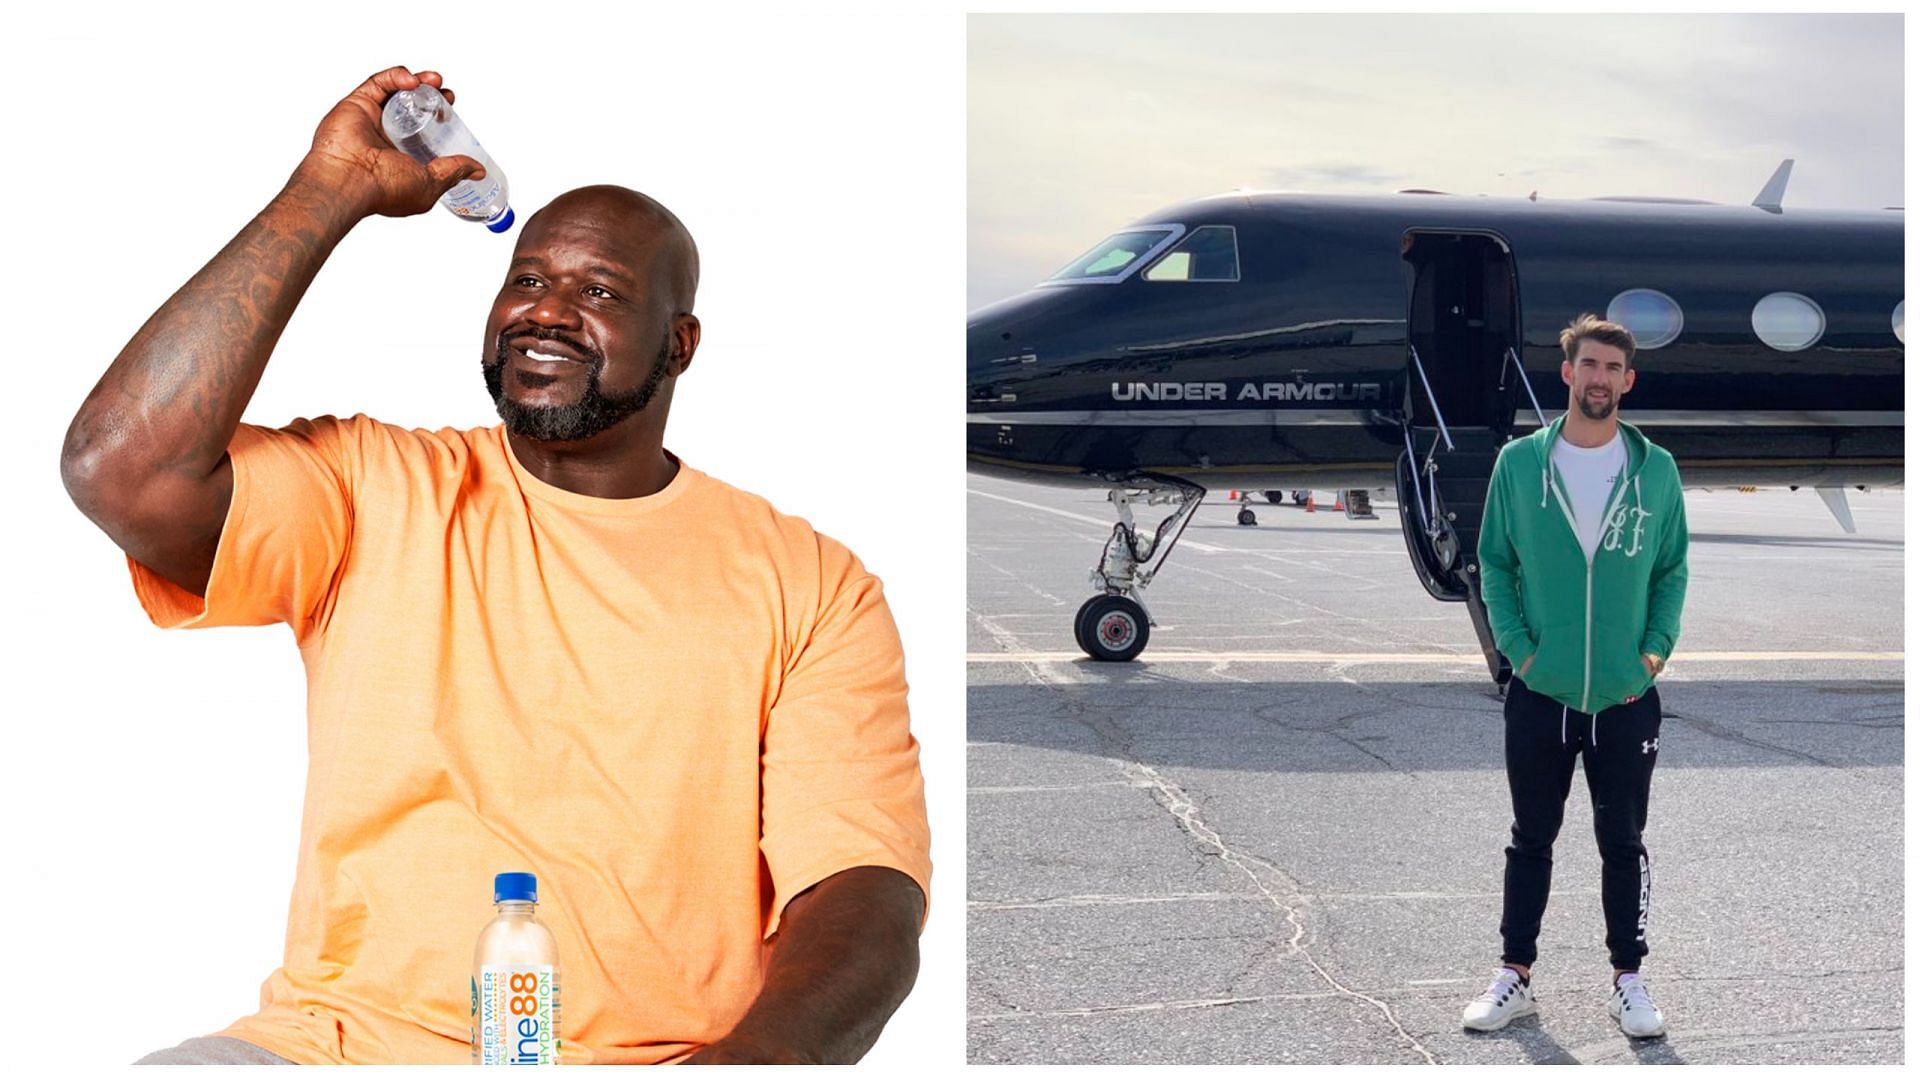 Shaq (L) and Michael Phelps (R) (Pic Credit: Respective Twitter handles)